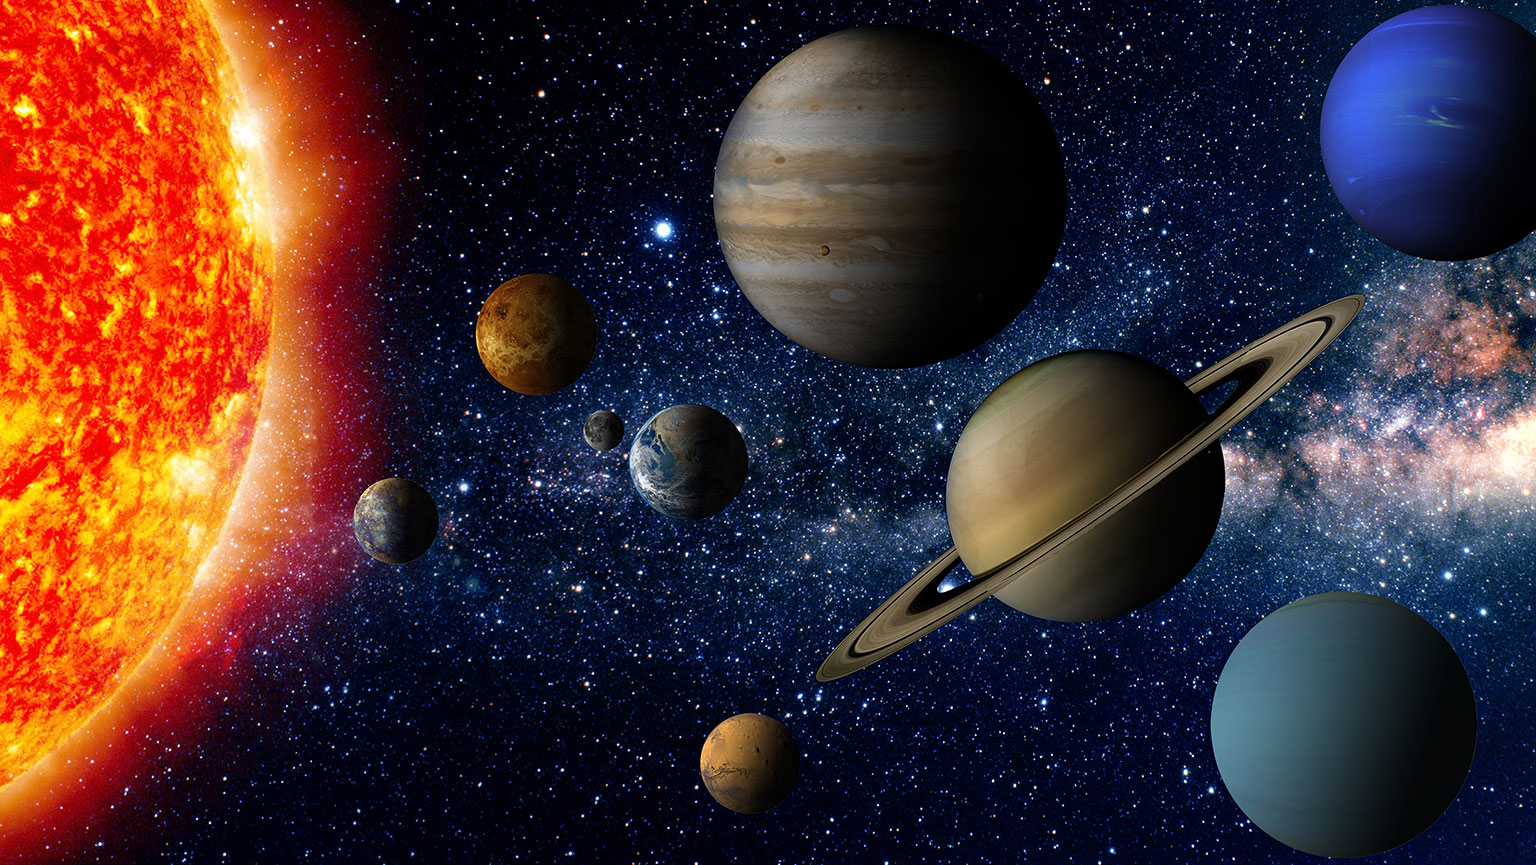 If You Get 14/17 on This Random Trivia Quiz, Then It’s Official: You Are Extremely Knowledgeable Solar System